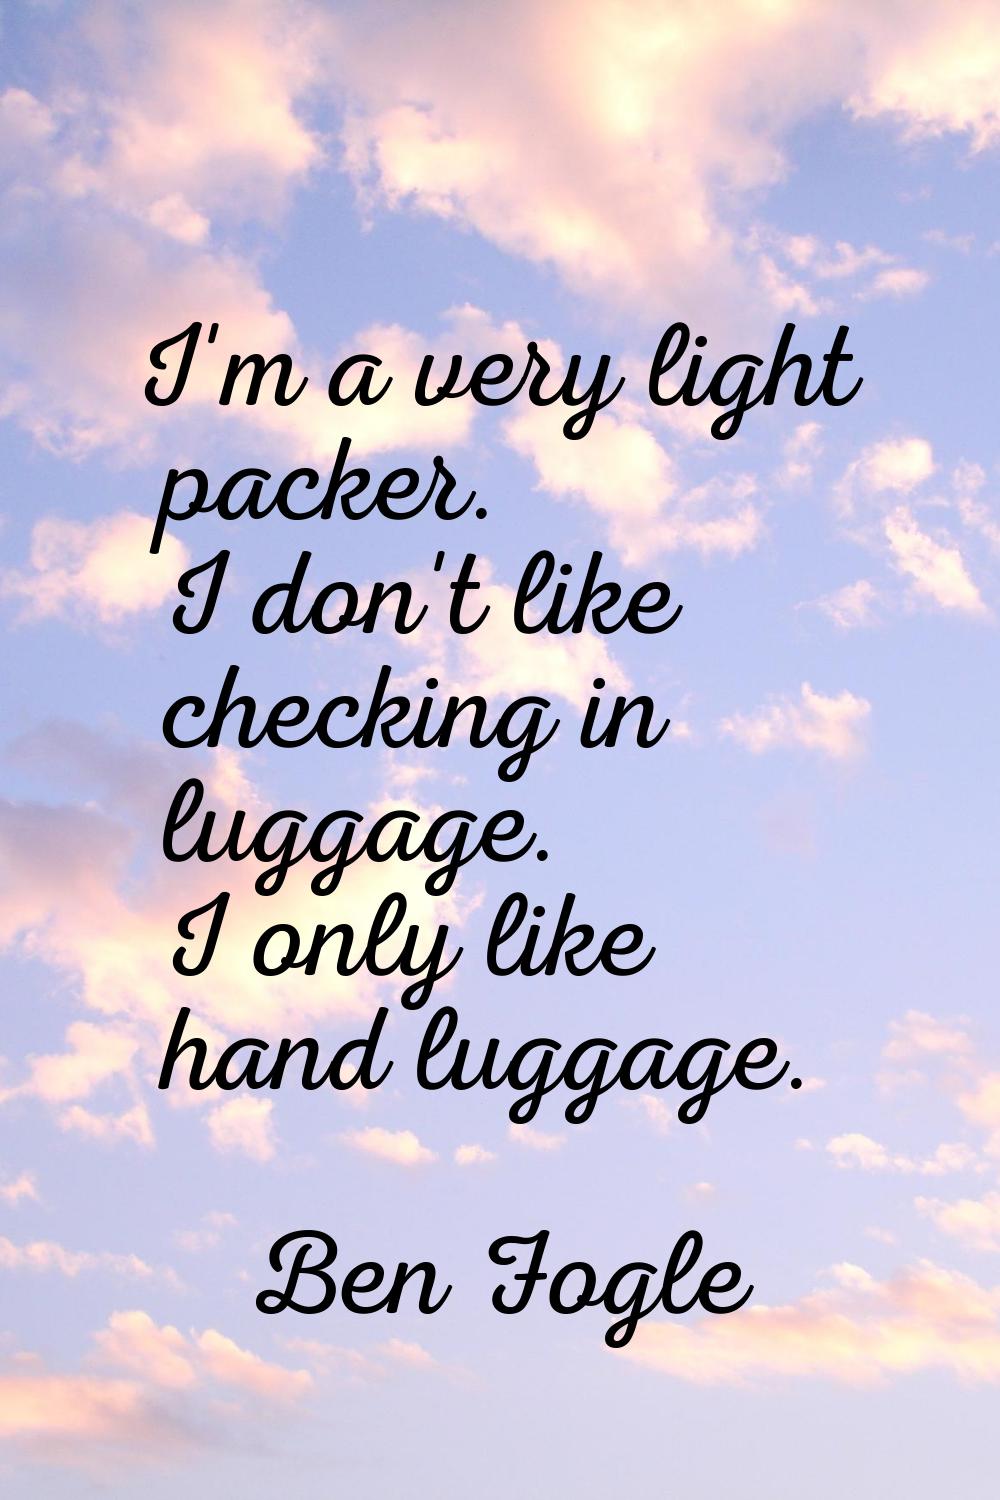 I'm a very light packer. I don't like checking in luggage. I only like hand luggage.